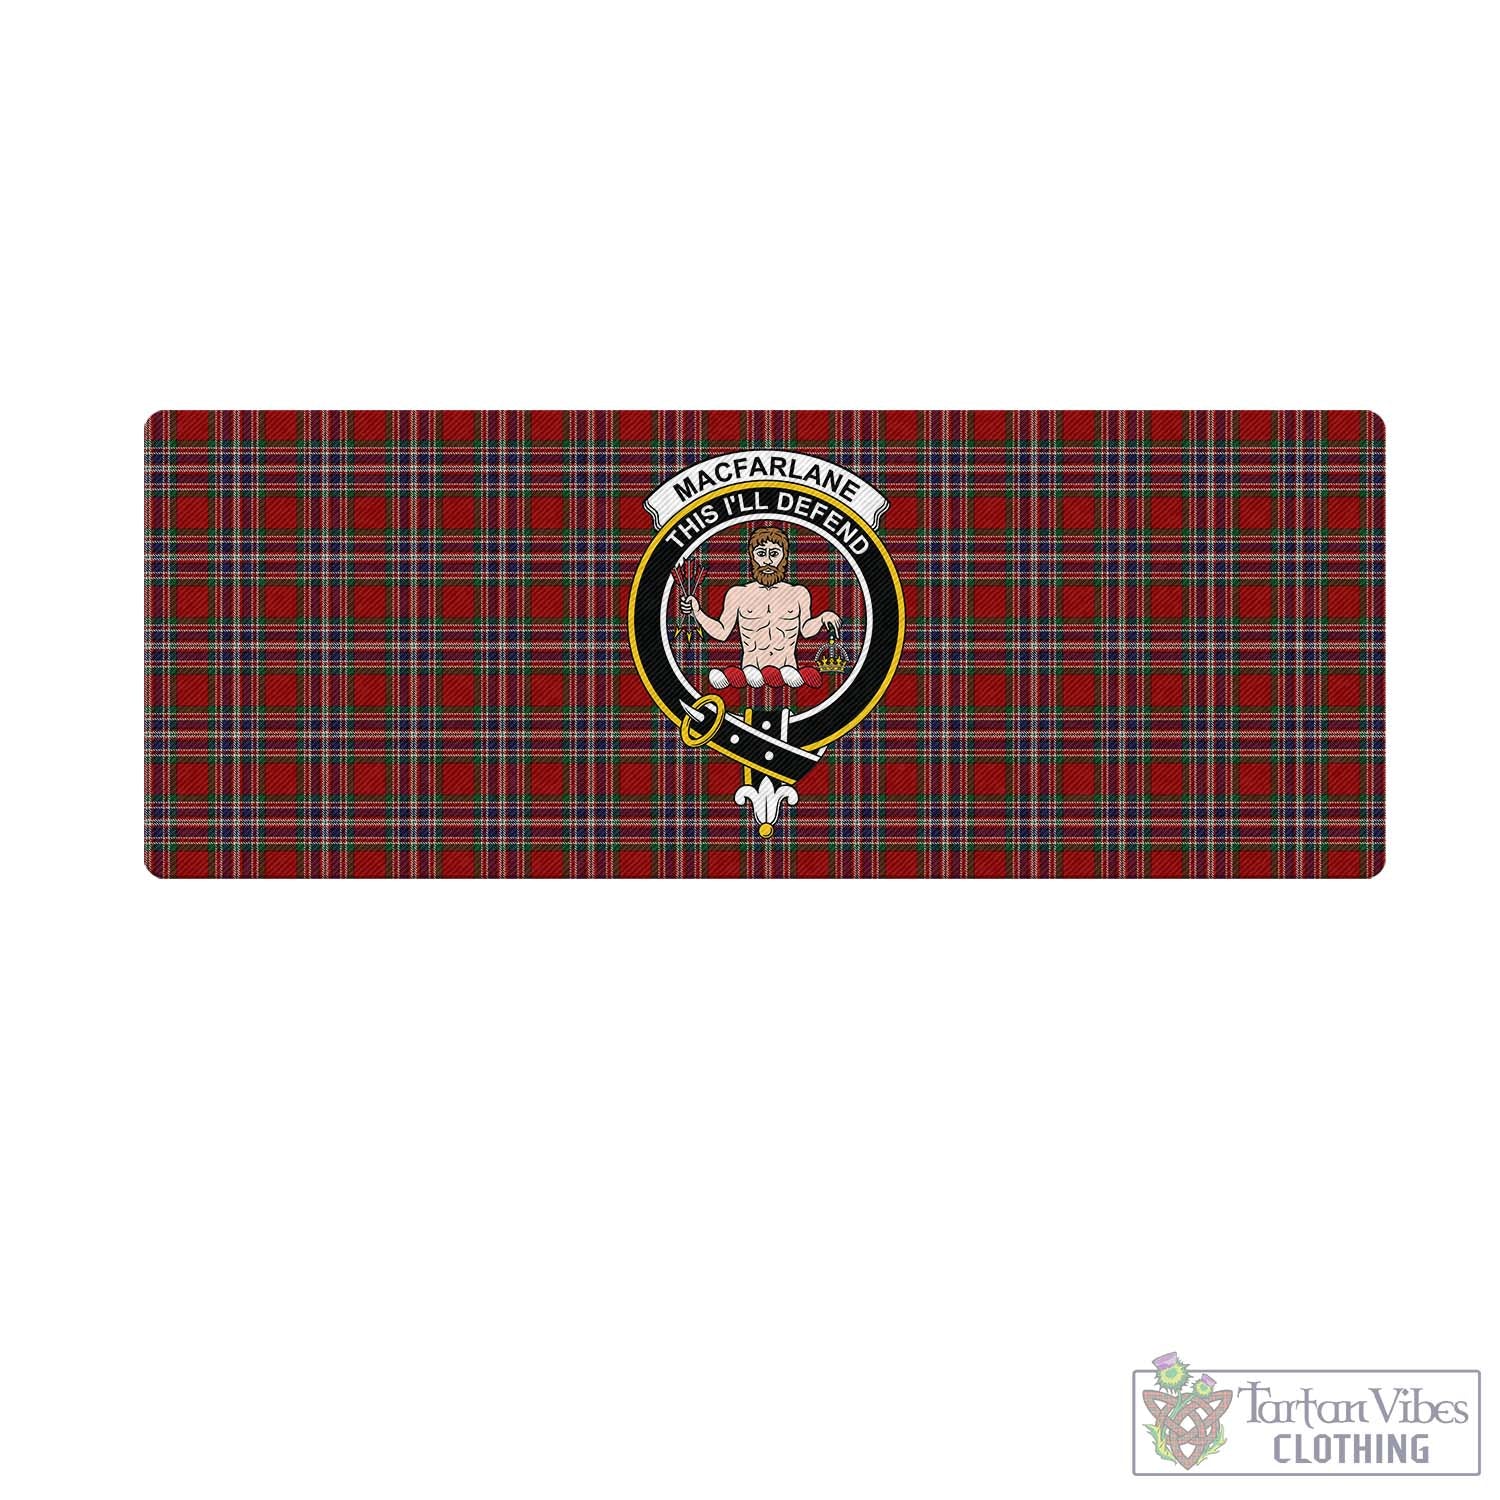 Tartan Vibes Clothing MacFarlane Red Tartan Mouse Pad with Family Crest